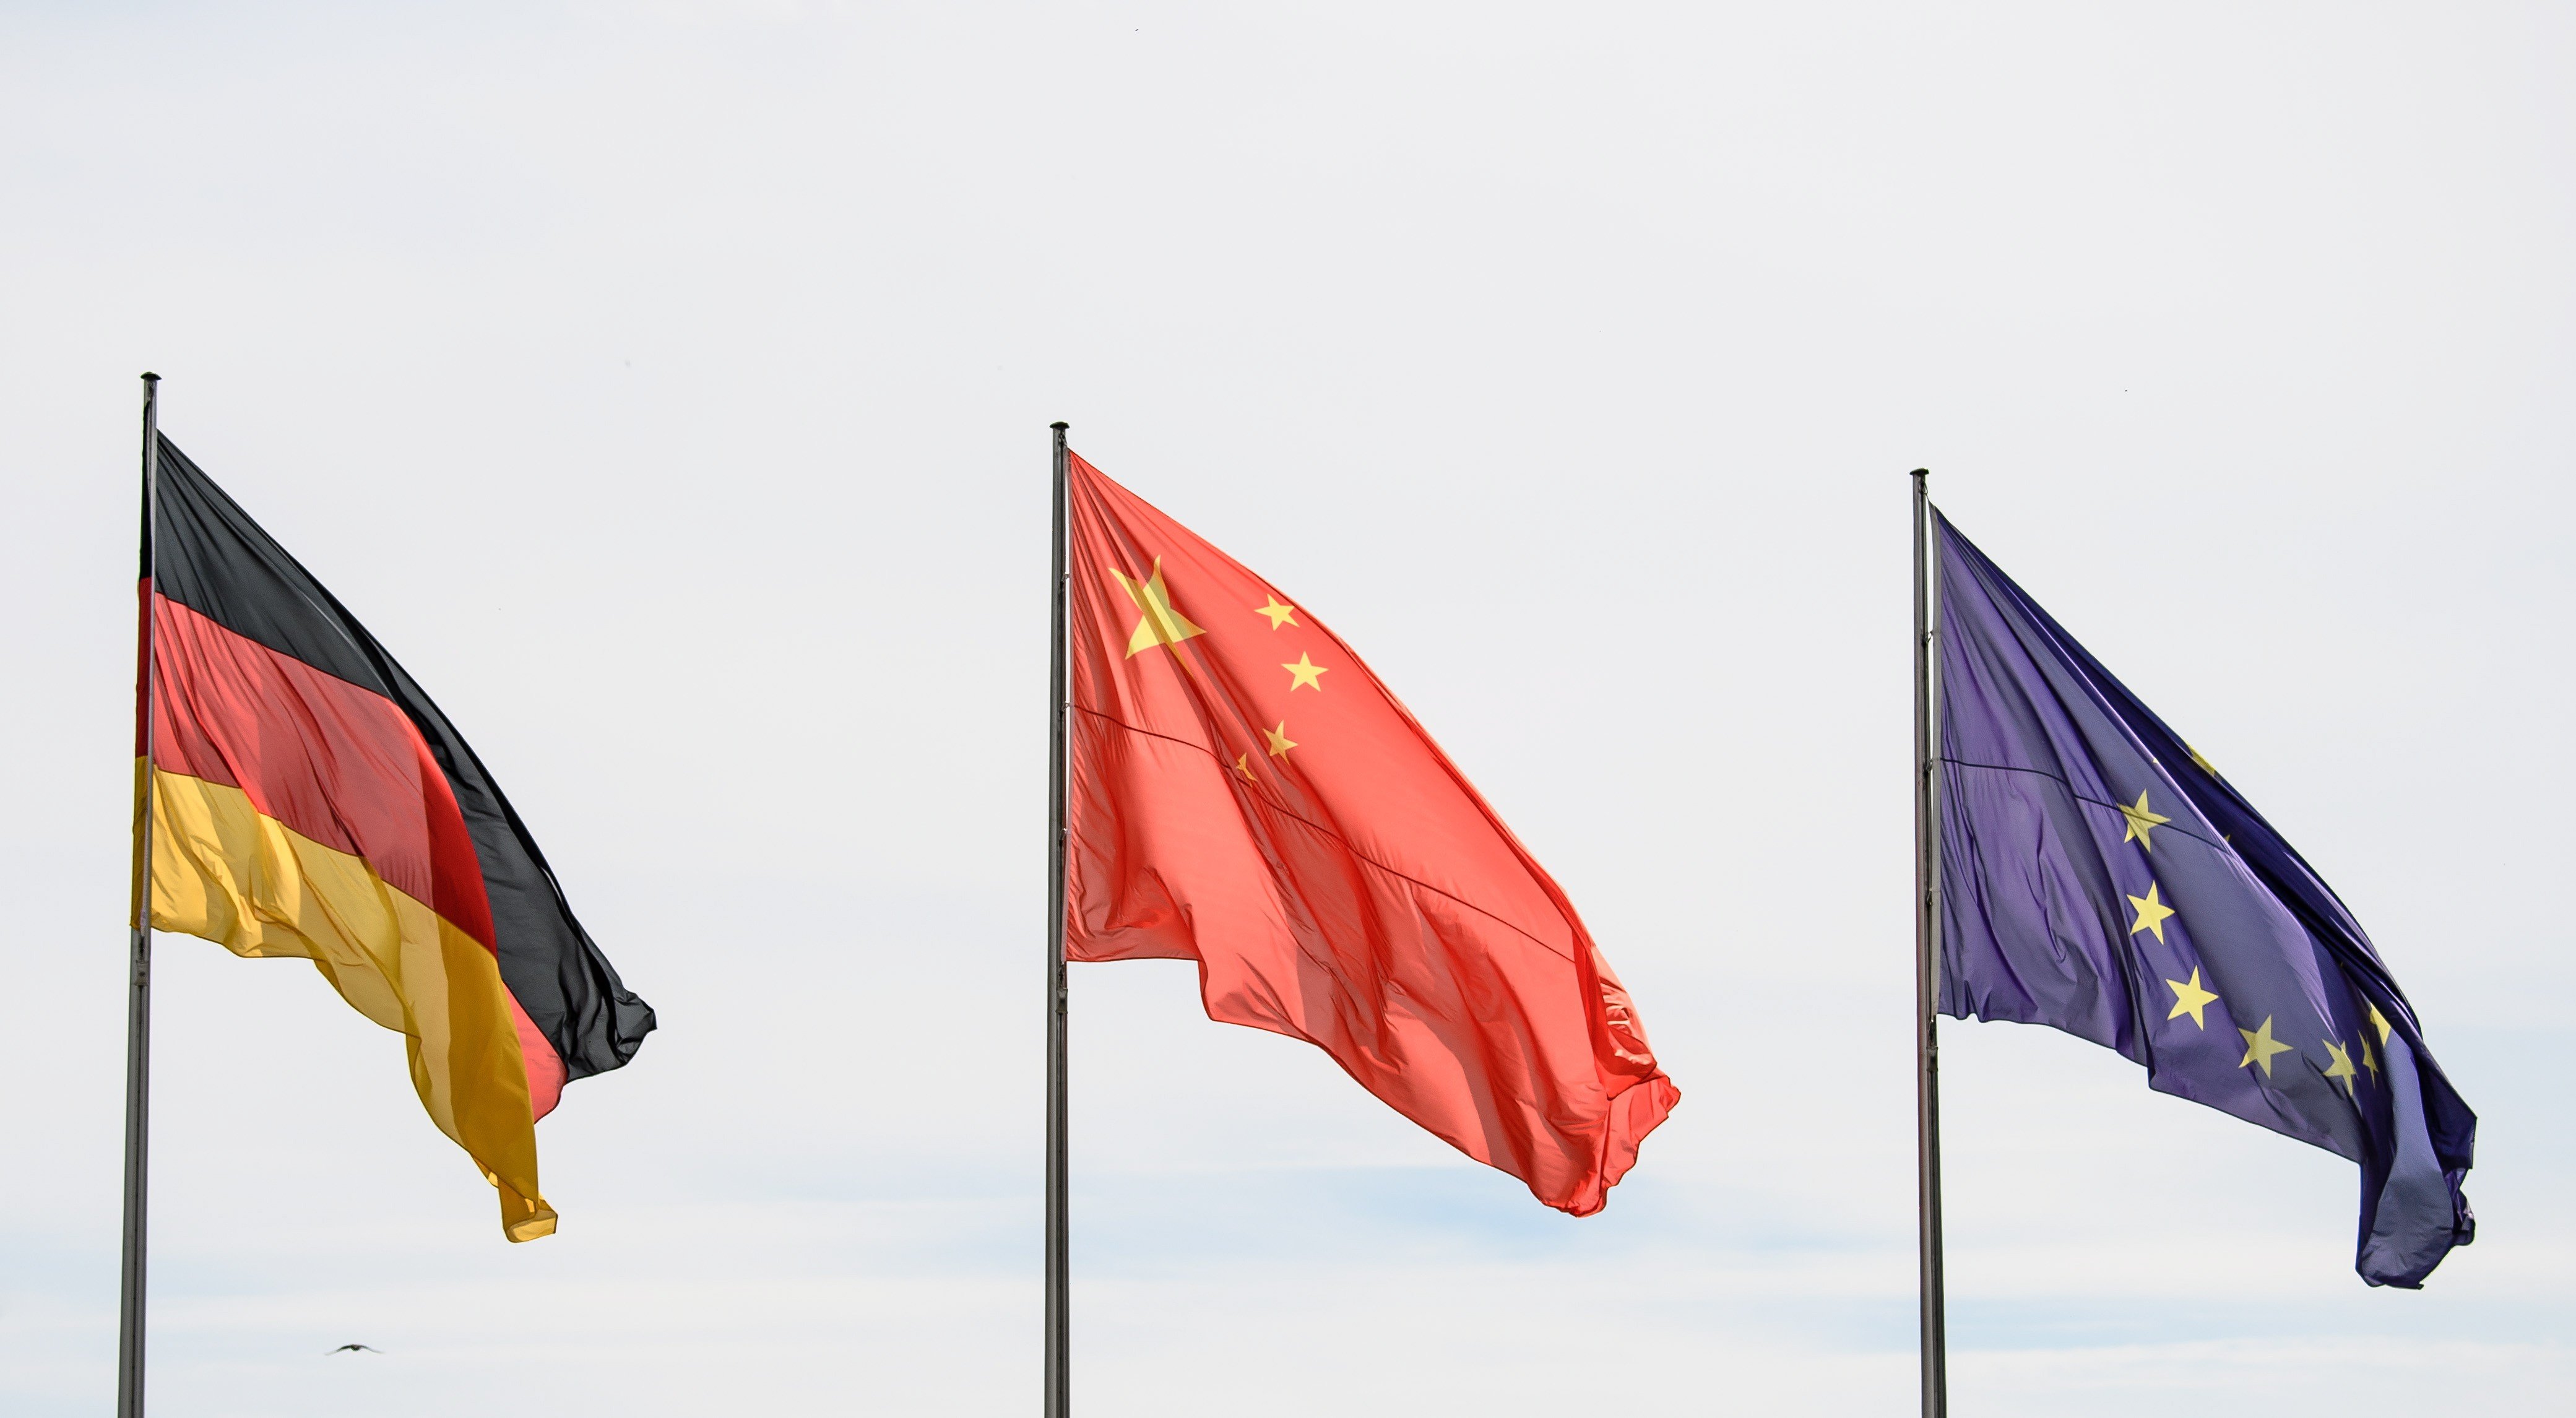 The German, Chinese and EU flags fly in Berlin, Germany, in readiness for German-Chinese bilateral government talks last year. Just as Germany sits at the centre of the EU, China could one day be the leader of a future Asian Union – if it heeds the lessons of history. Photo: EPA-EFE